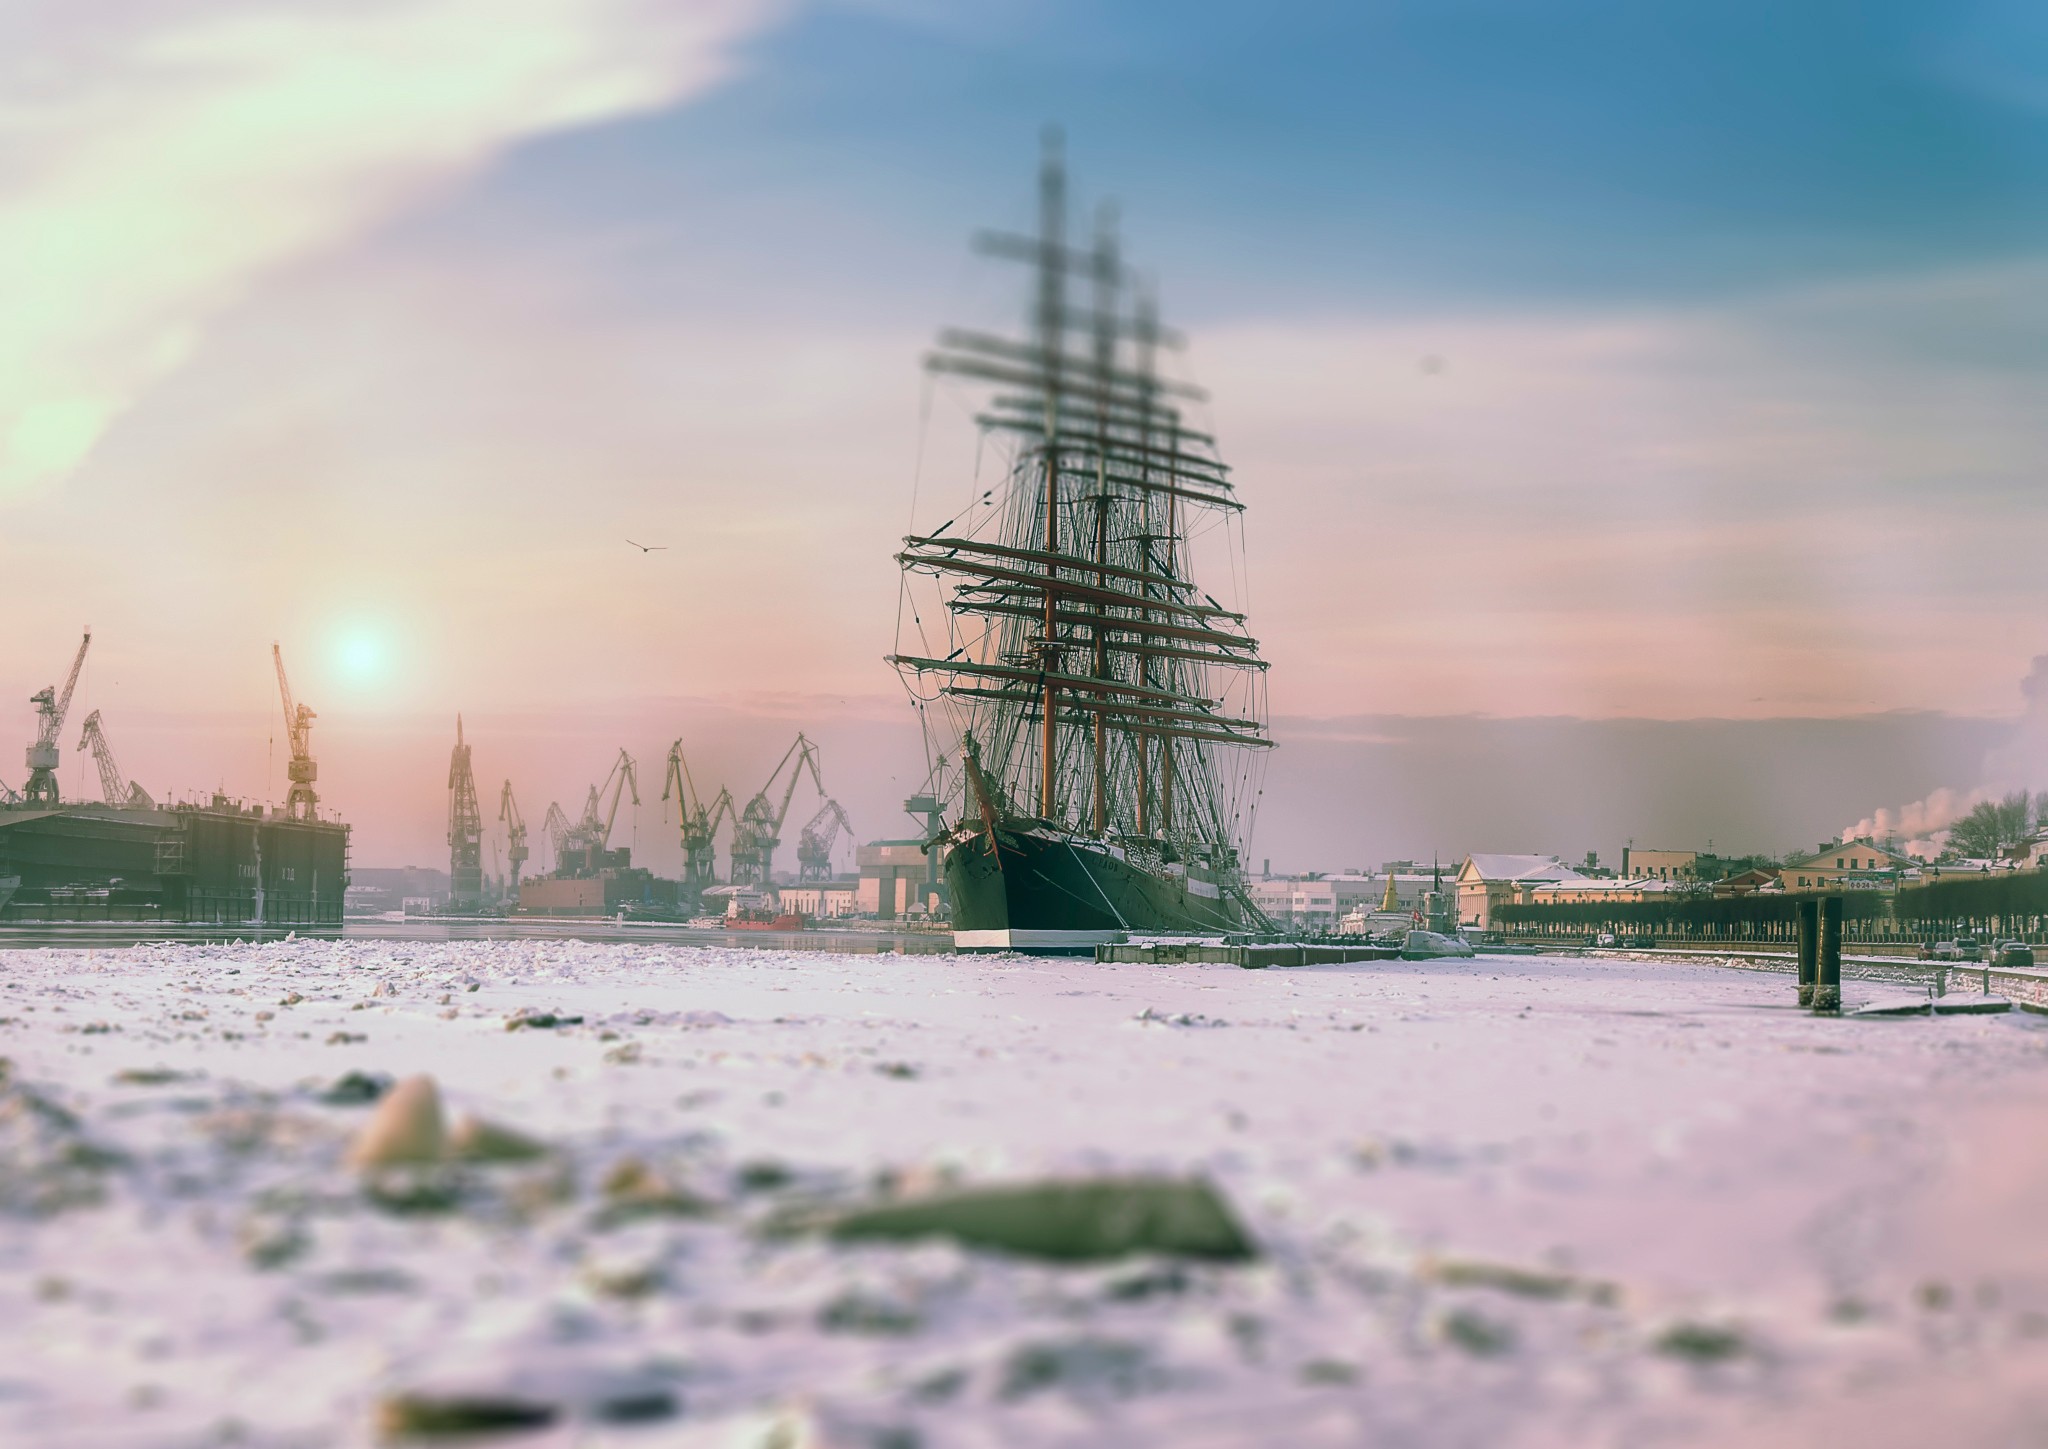 General 2048x1449 St. Petersburg city ship winter ice sailing ship vehicle cityscape